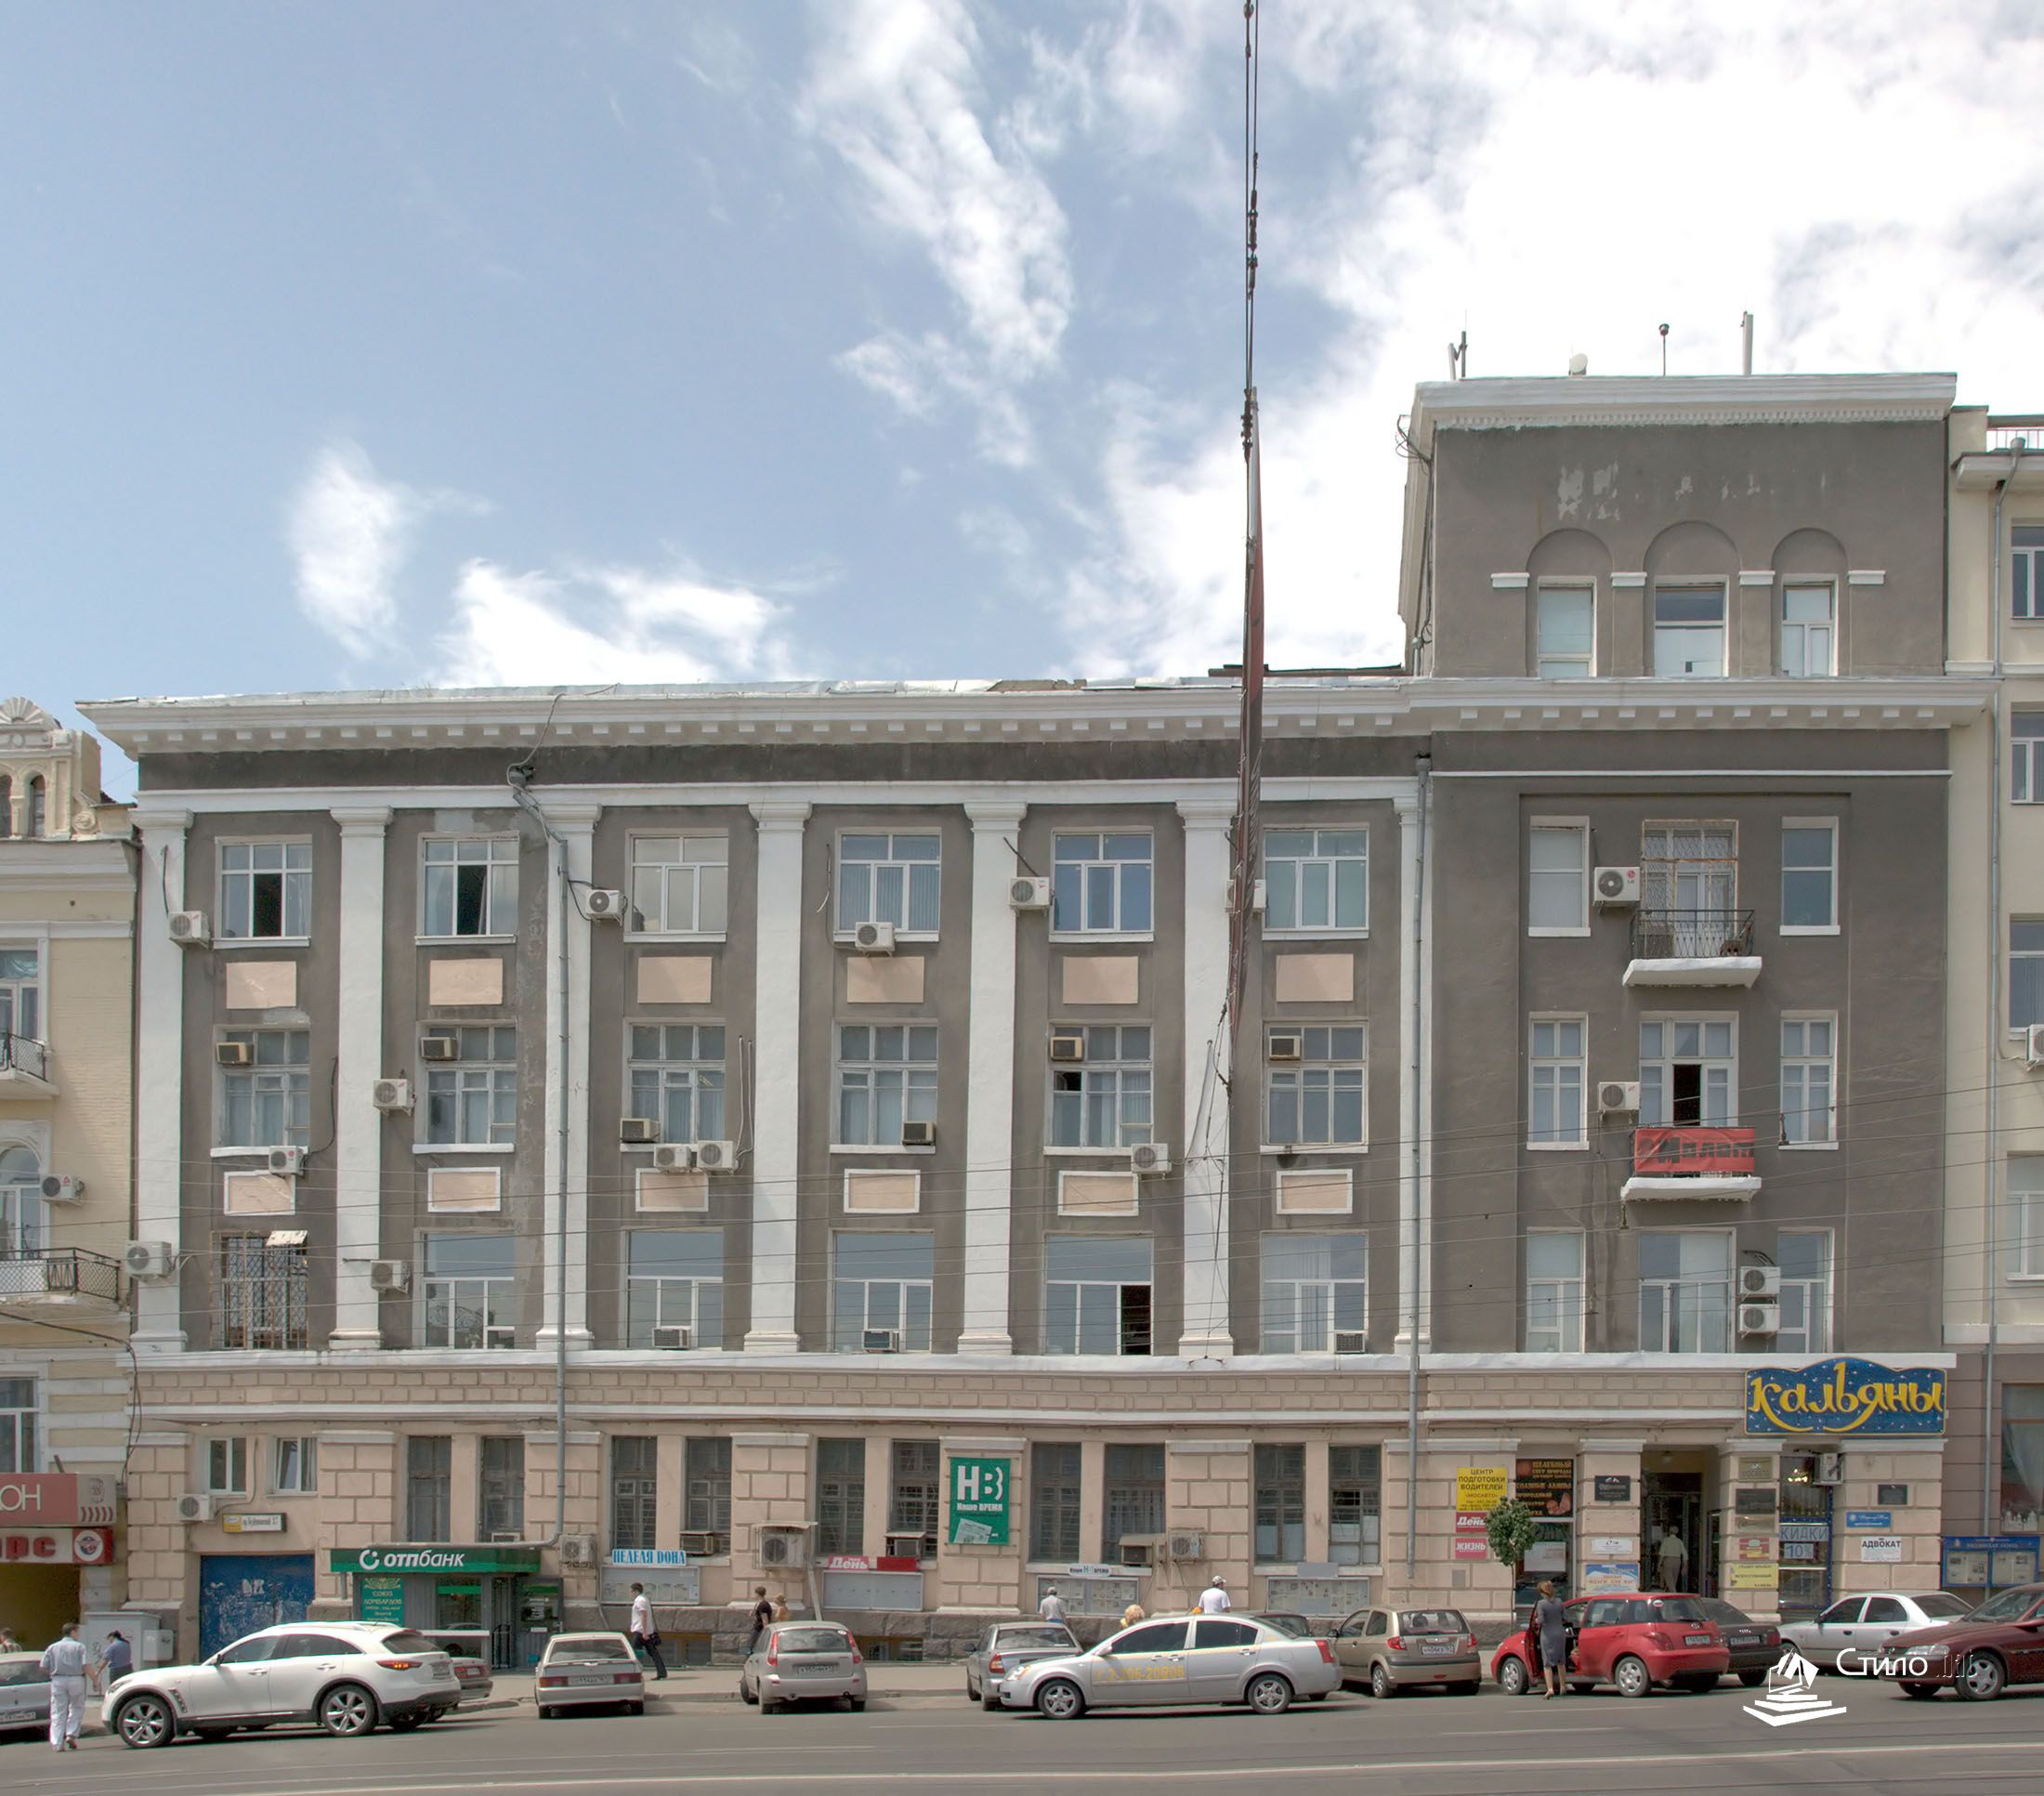 The building of the newspaper "Hammer" Rostov-on-don